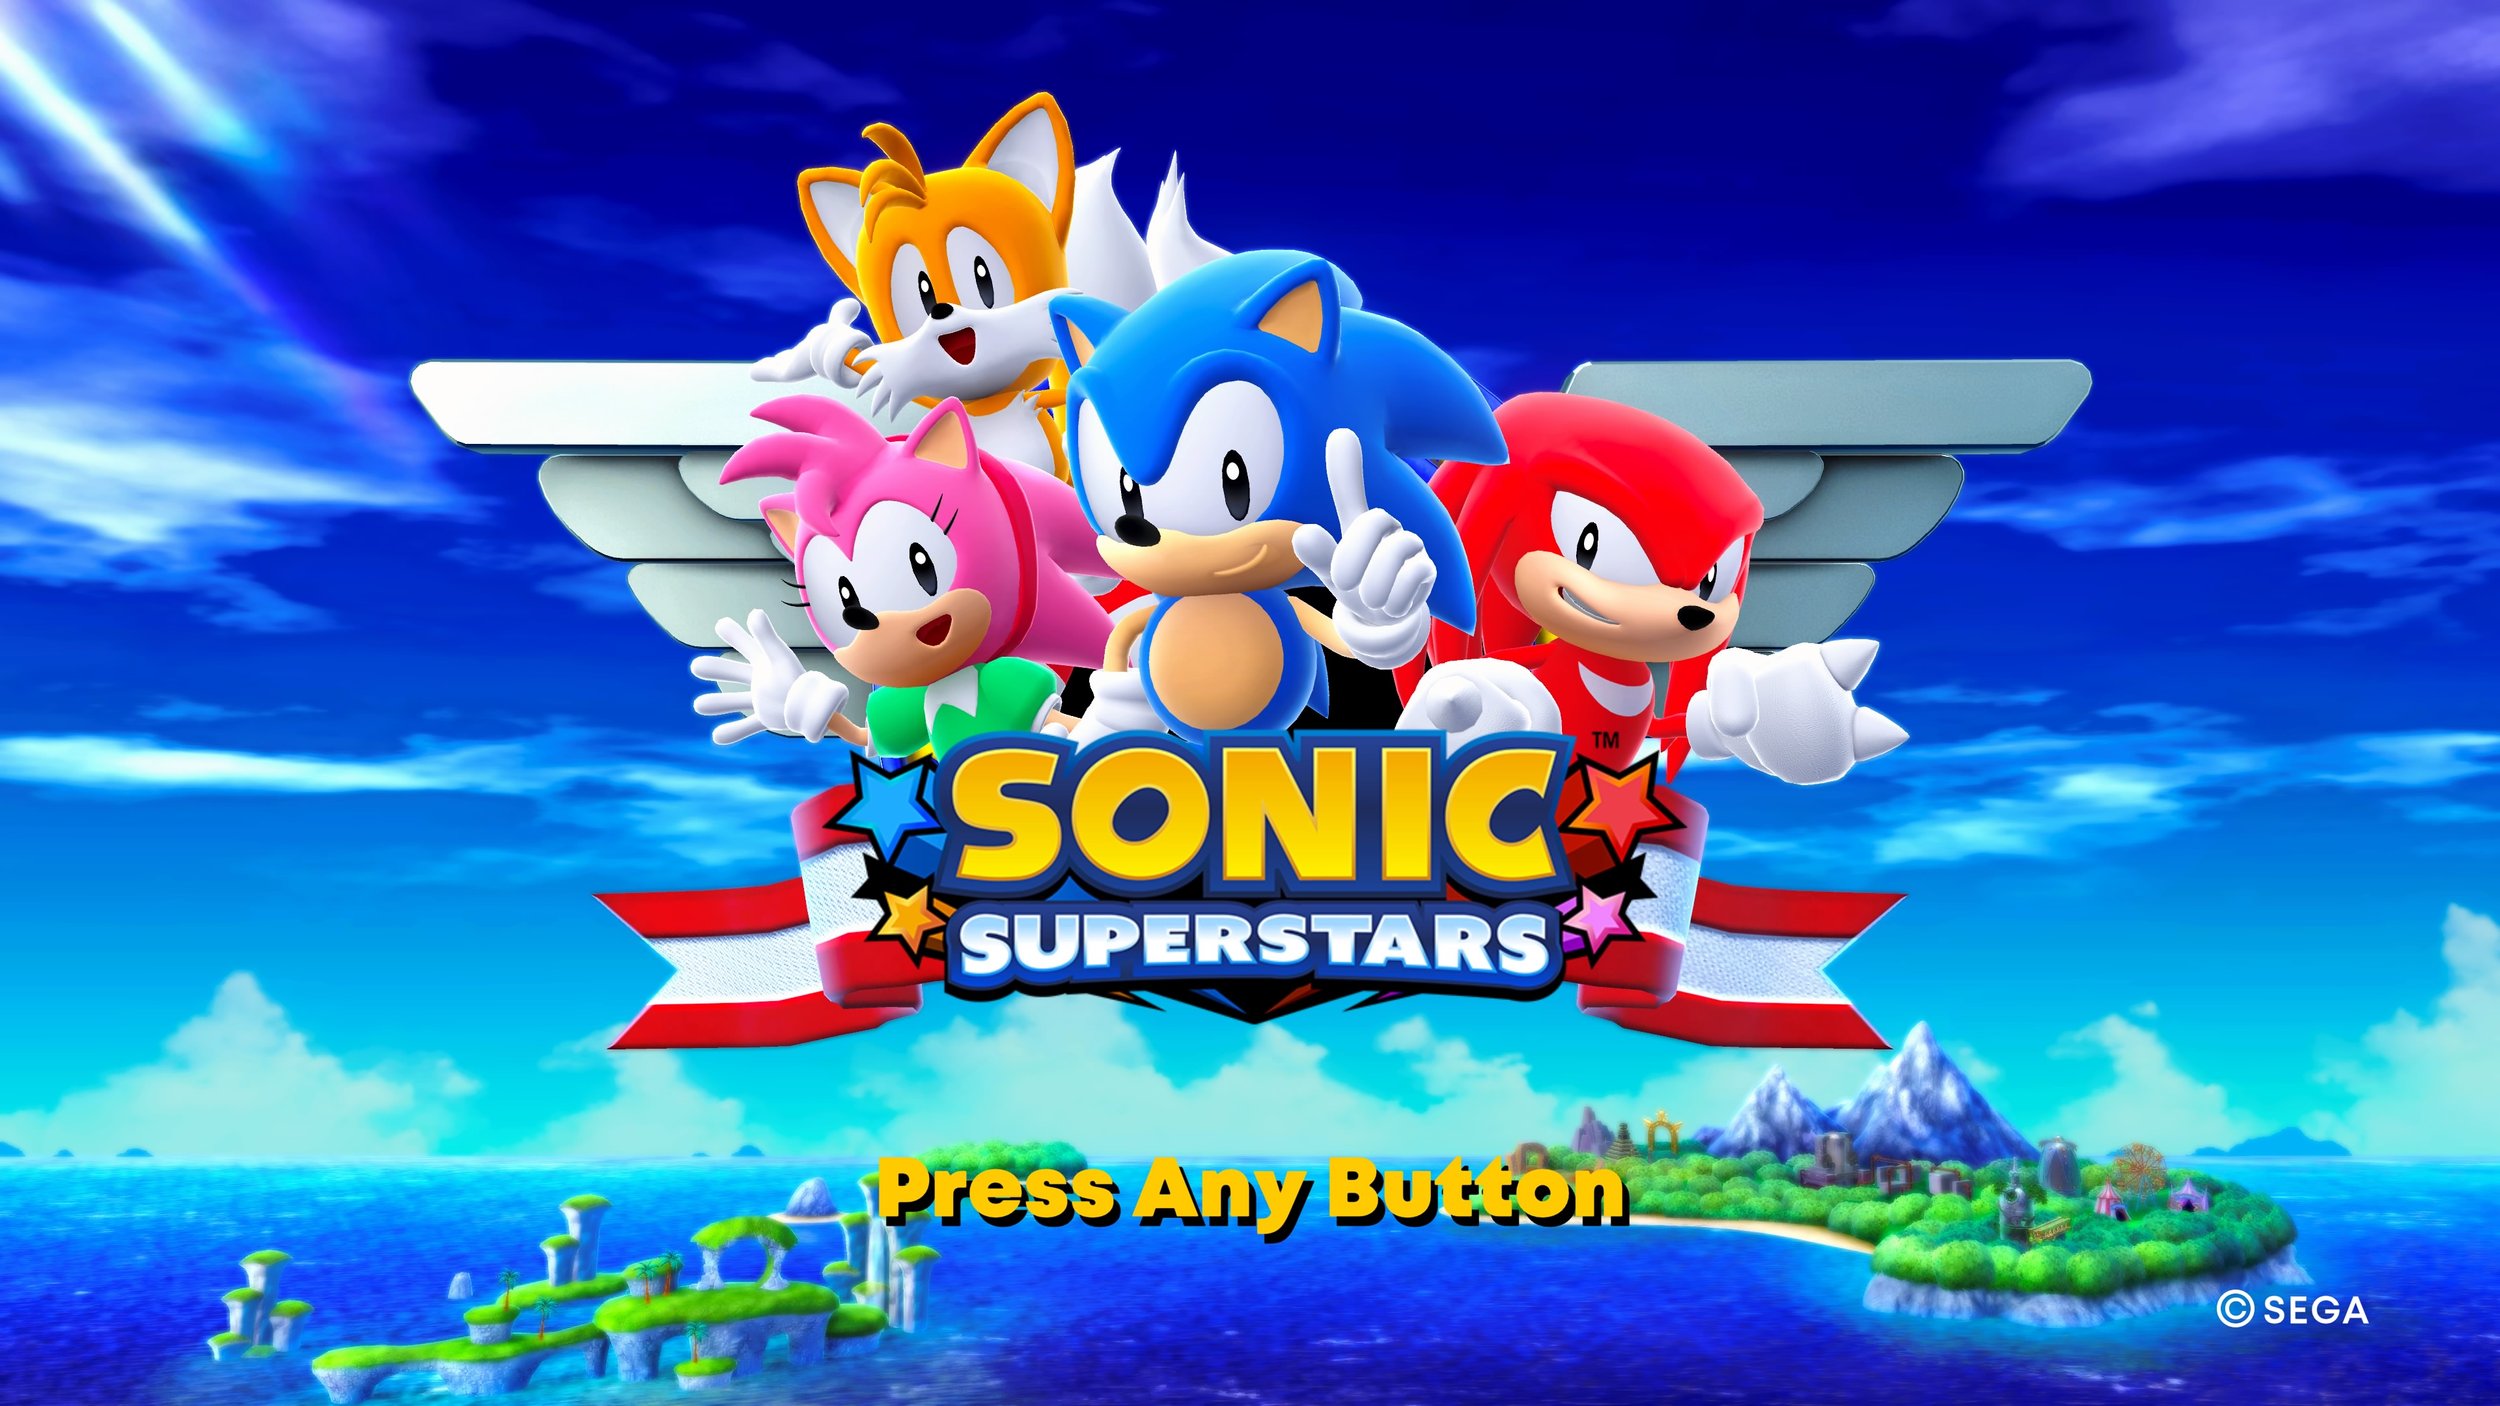 Sonic Superstars review: fun 2D throwback takes things slow